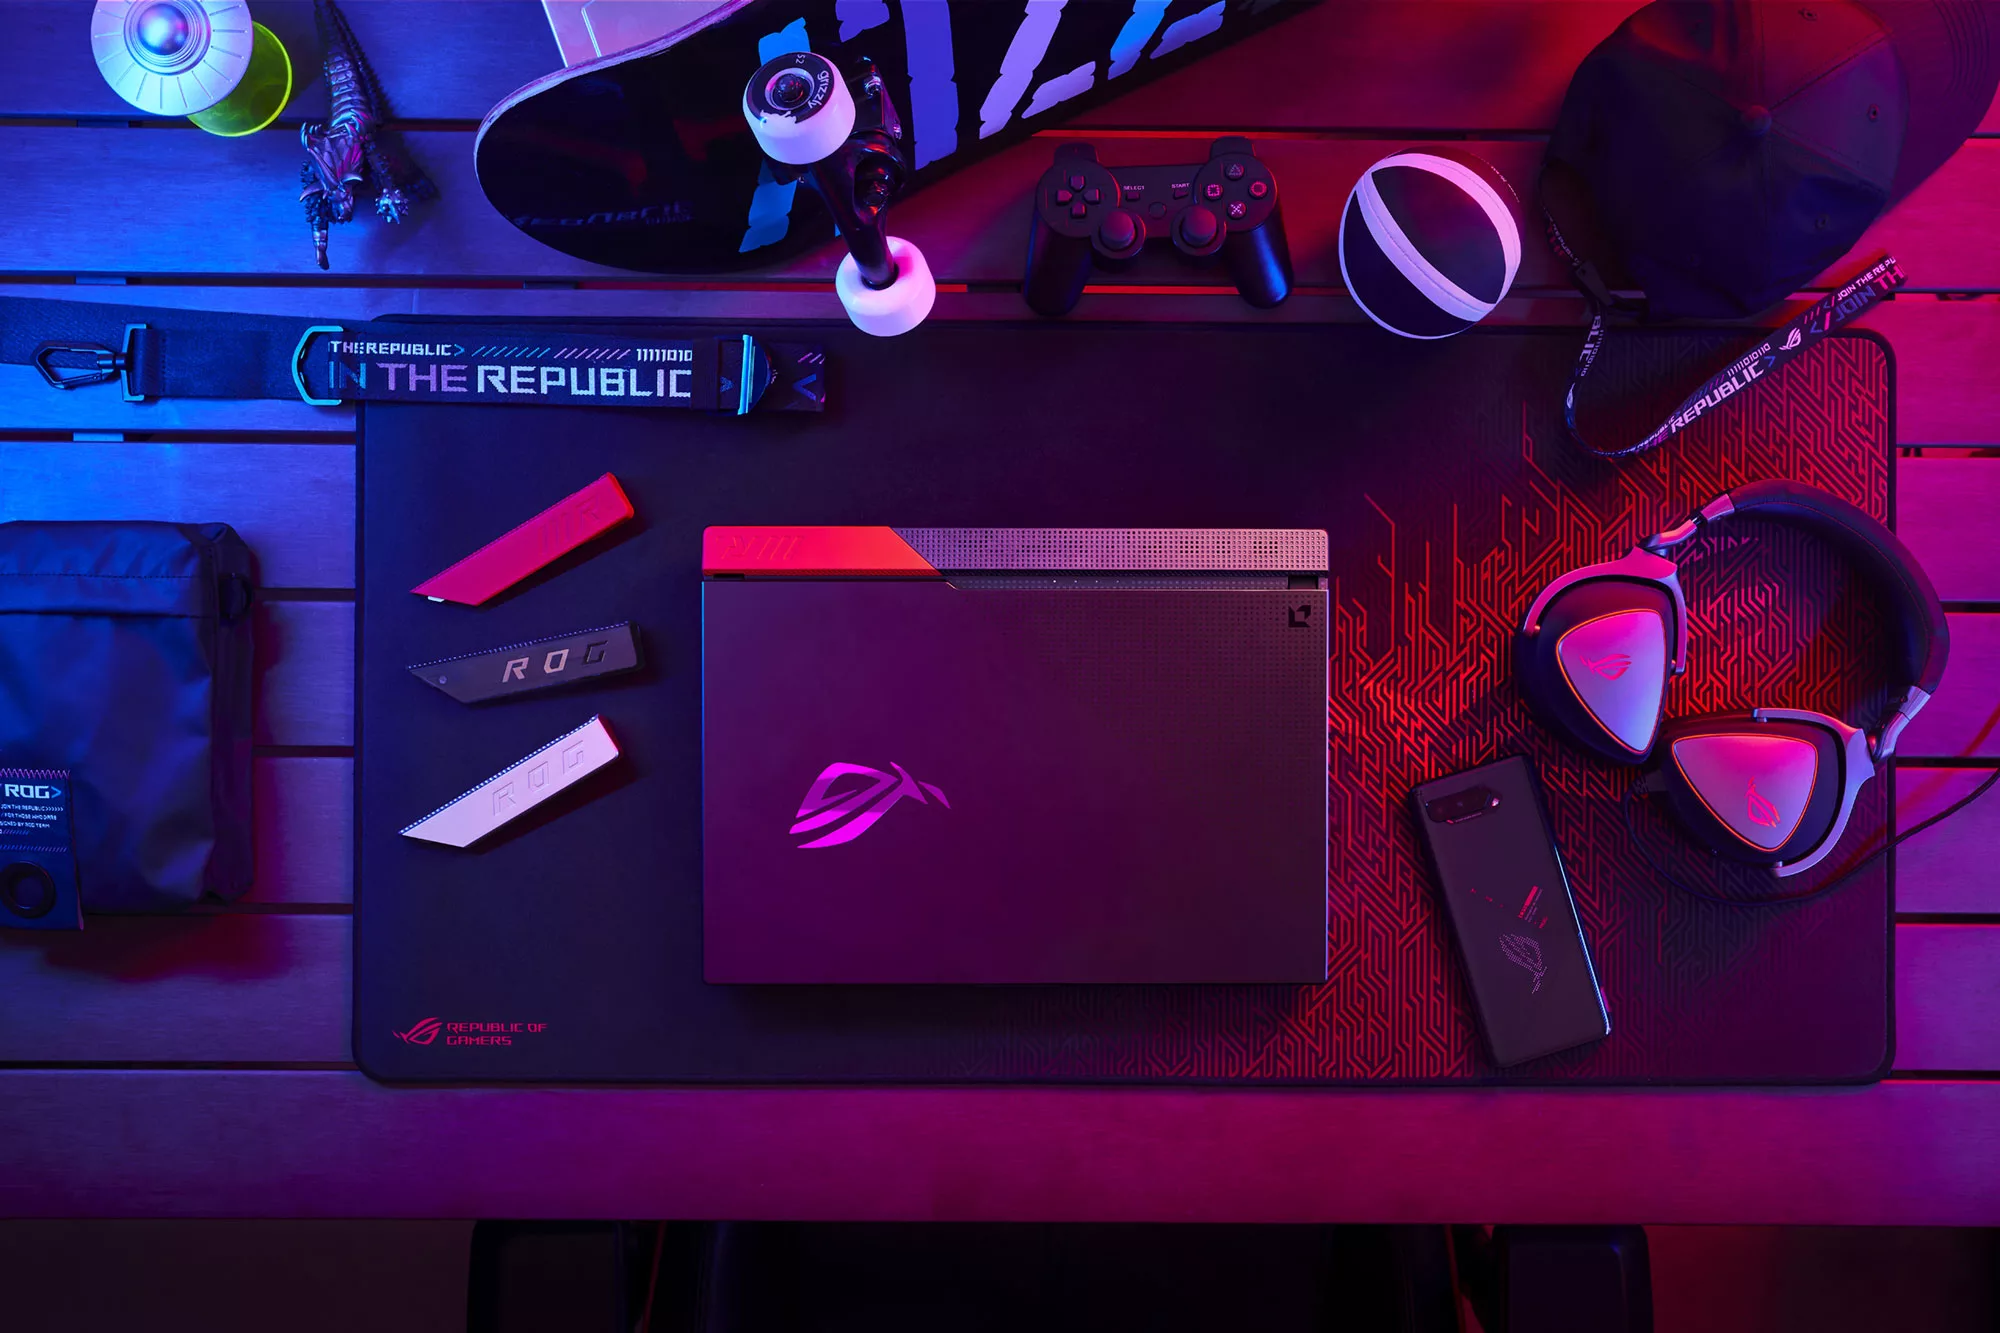 Top down view of the ROG Strix G Advantage Edition on a table, with multiple ROG peripherals nearby.